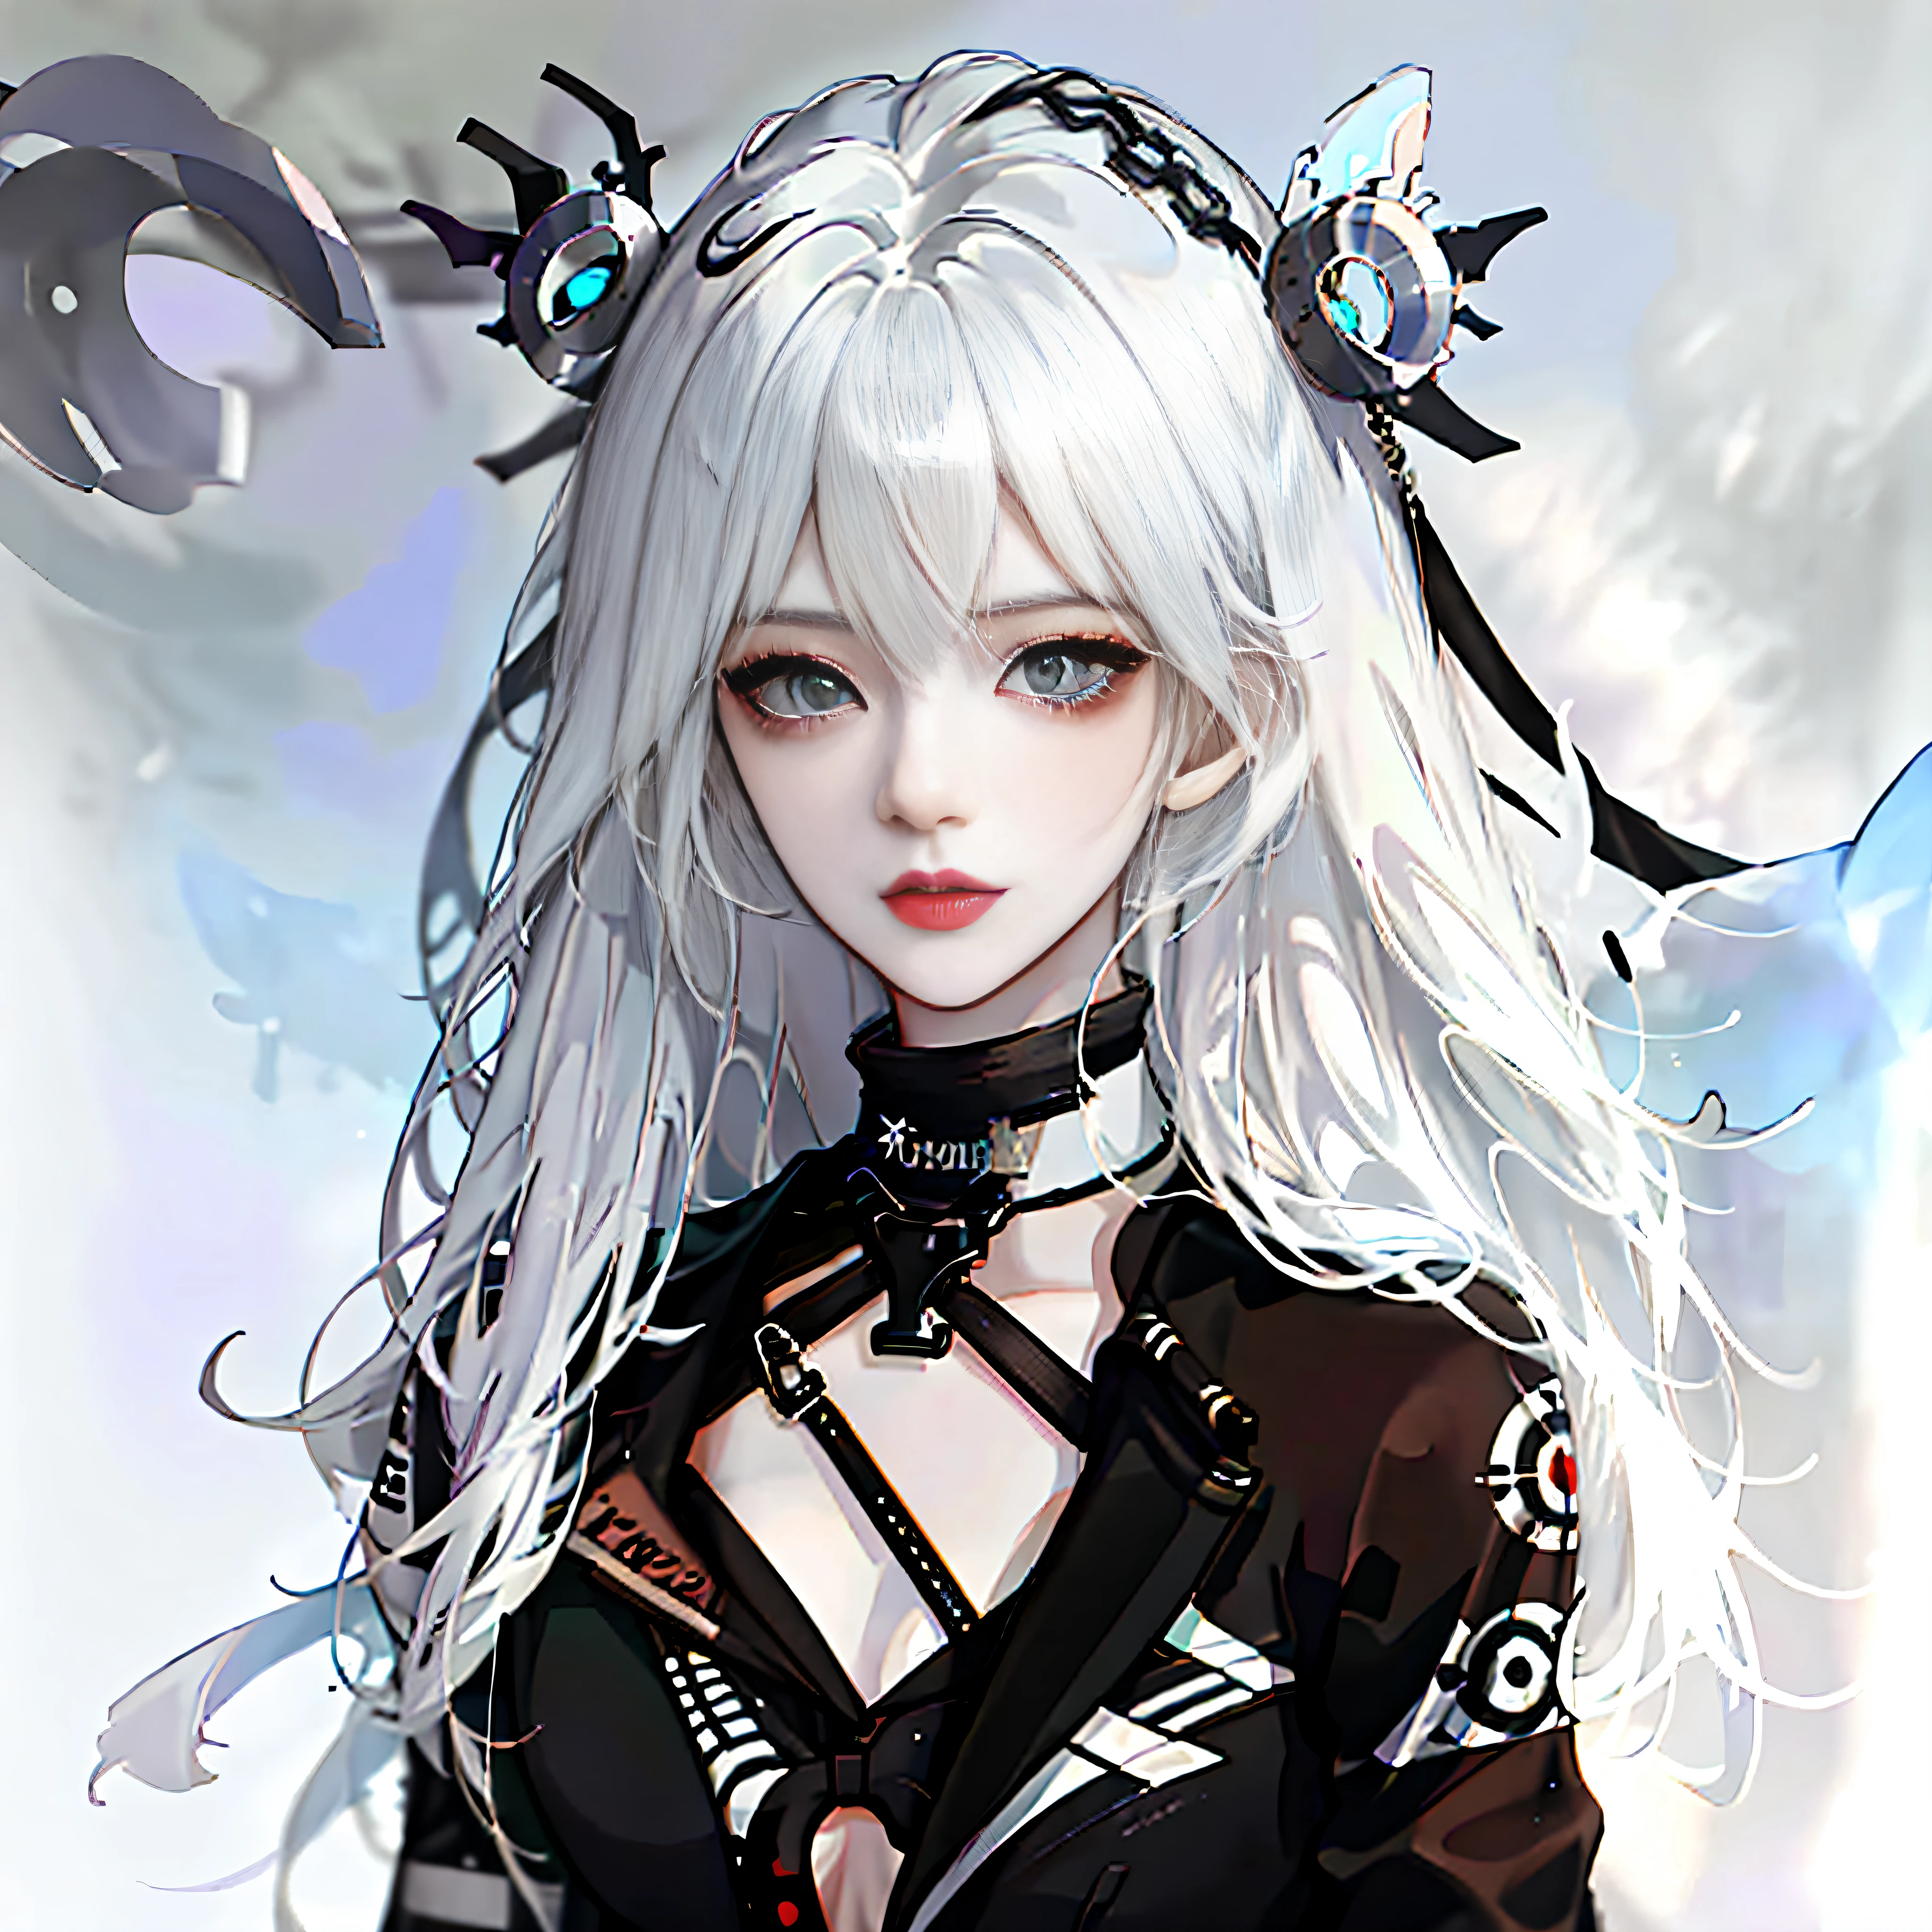 anime - style image of a woman with white hair and a black jacket, from girls frontline, Perfect white haired girl, Girl with white hair, white-haired god, white haired Cangcang, girls frontline style, Guweiz in Pixiv ArtStation, Guweiz on ArtStation Pixiv, Best anime 4k konachan wallpaper